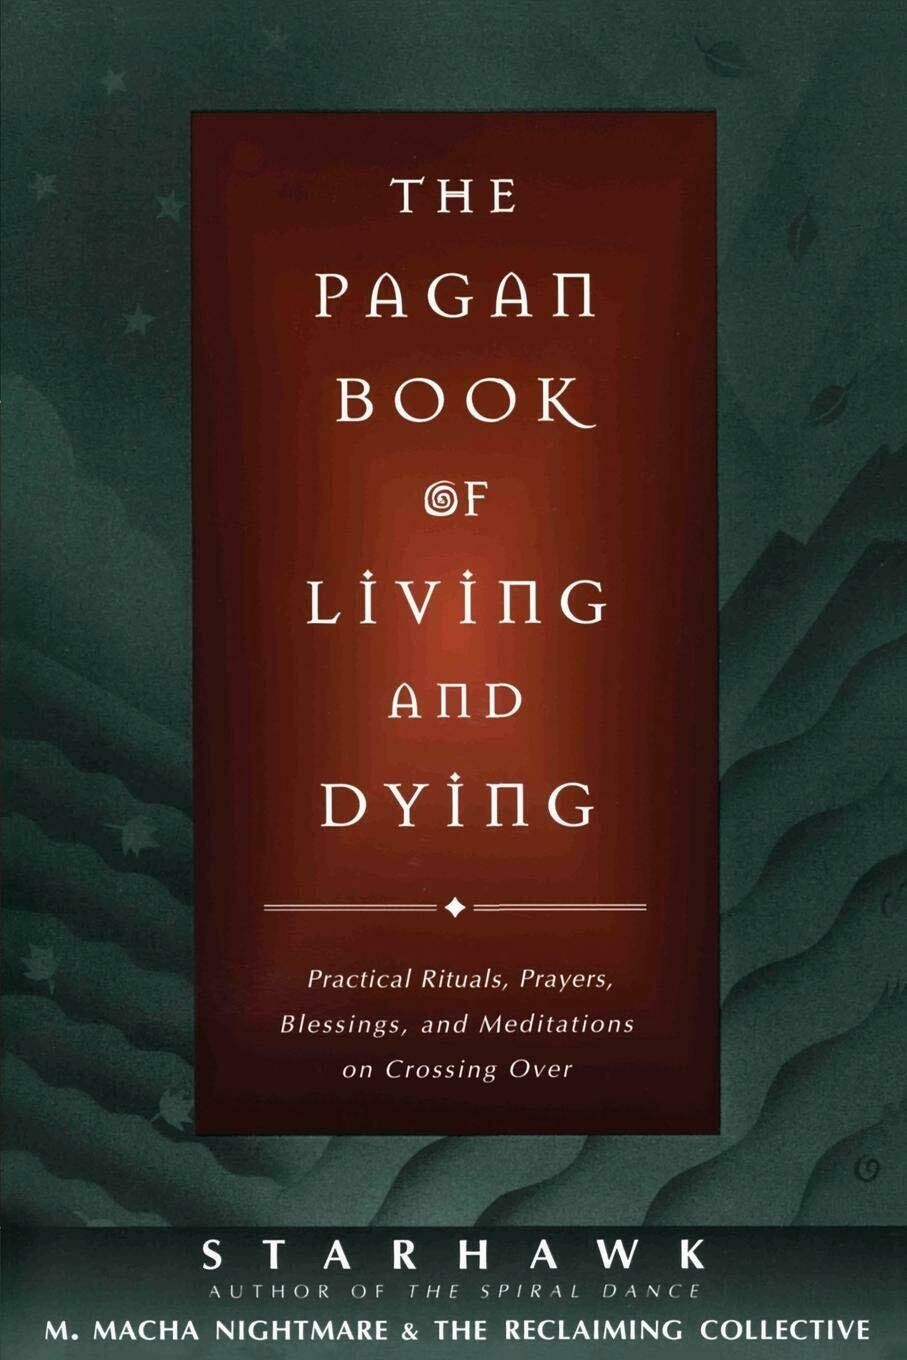 Pagan Book of Living and Dying by Starhawk